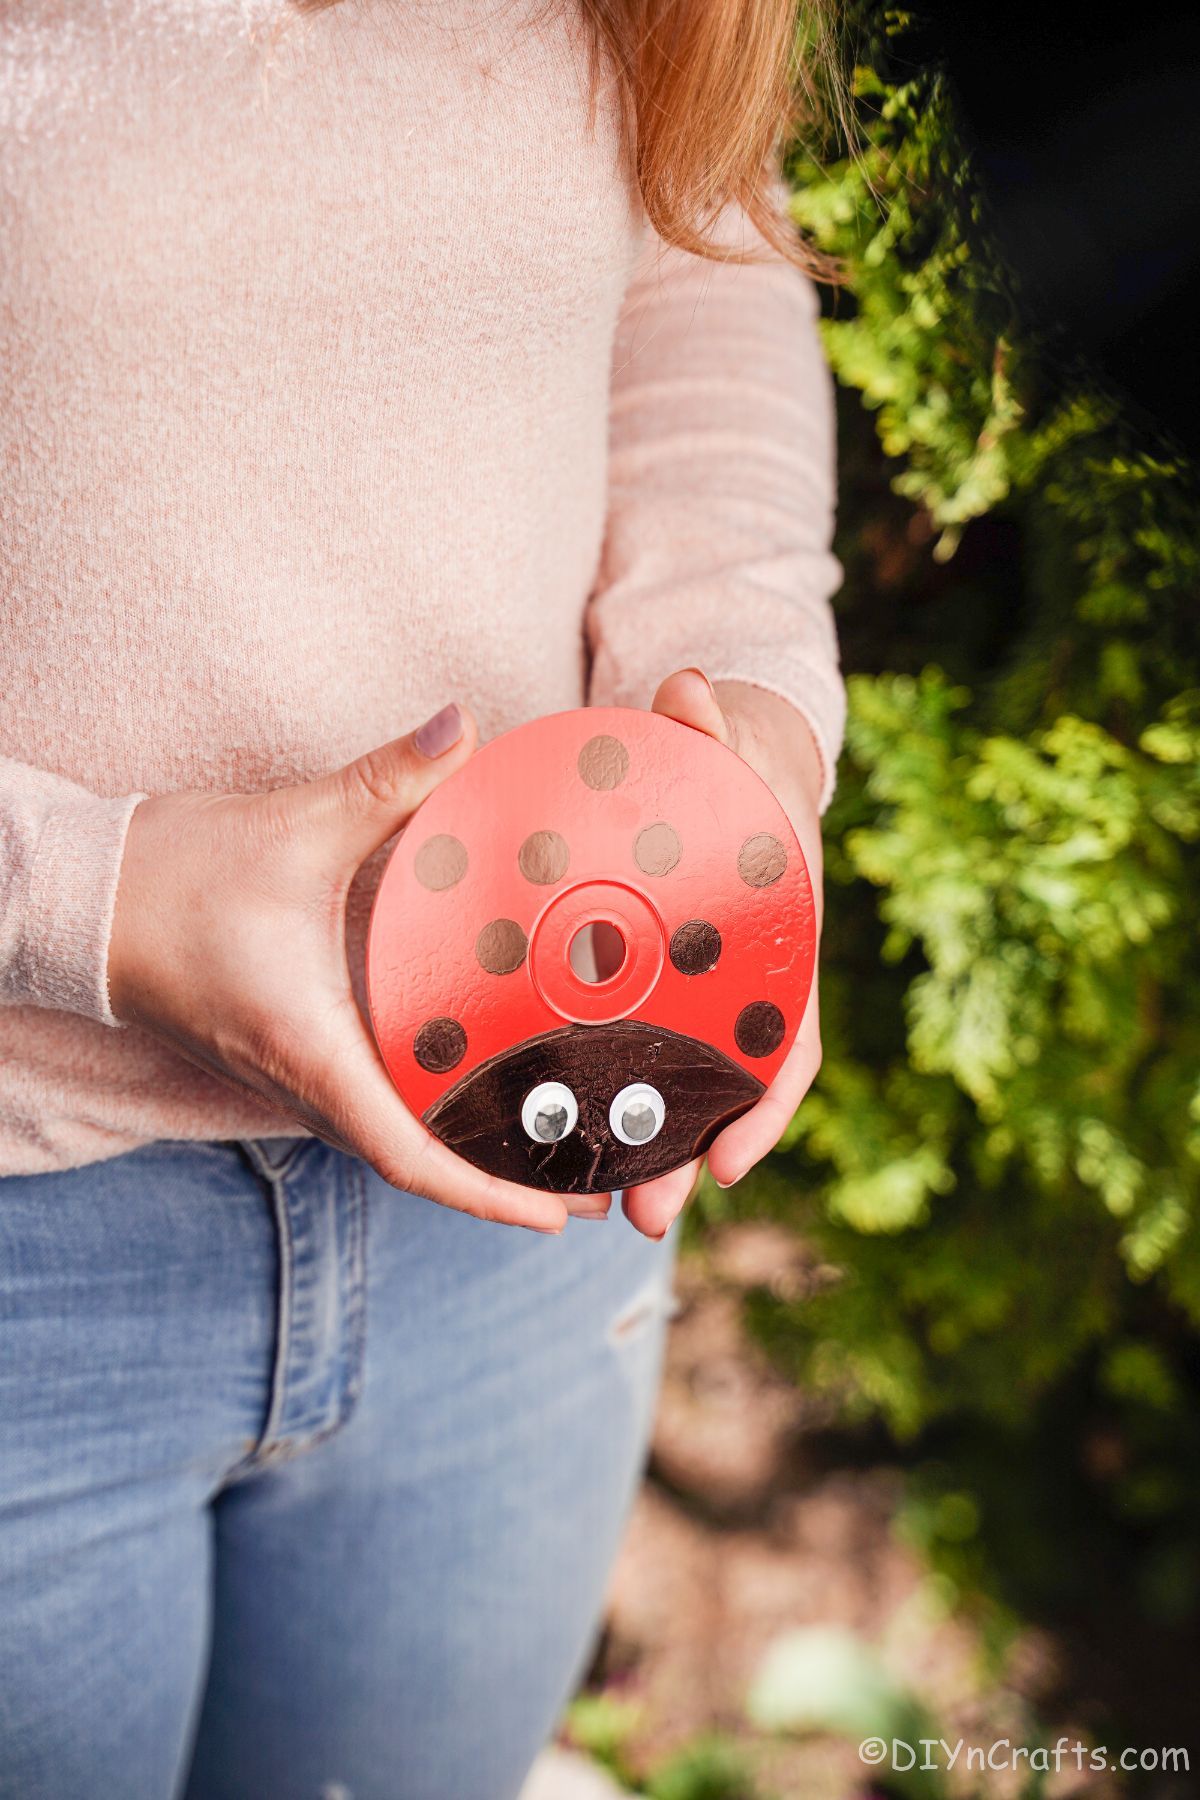 lady in pink and jeans holding a painted cd that looks like a ladybug